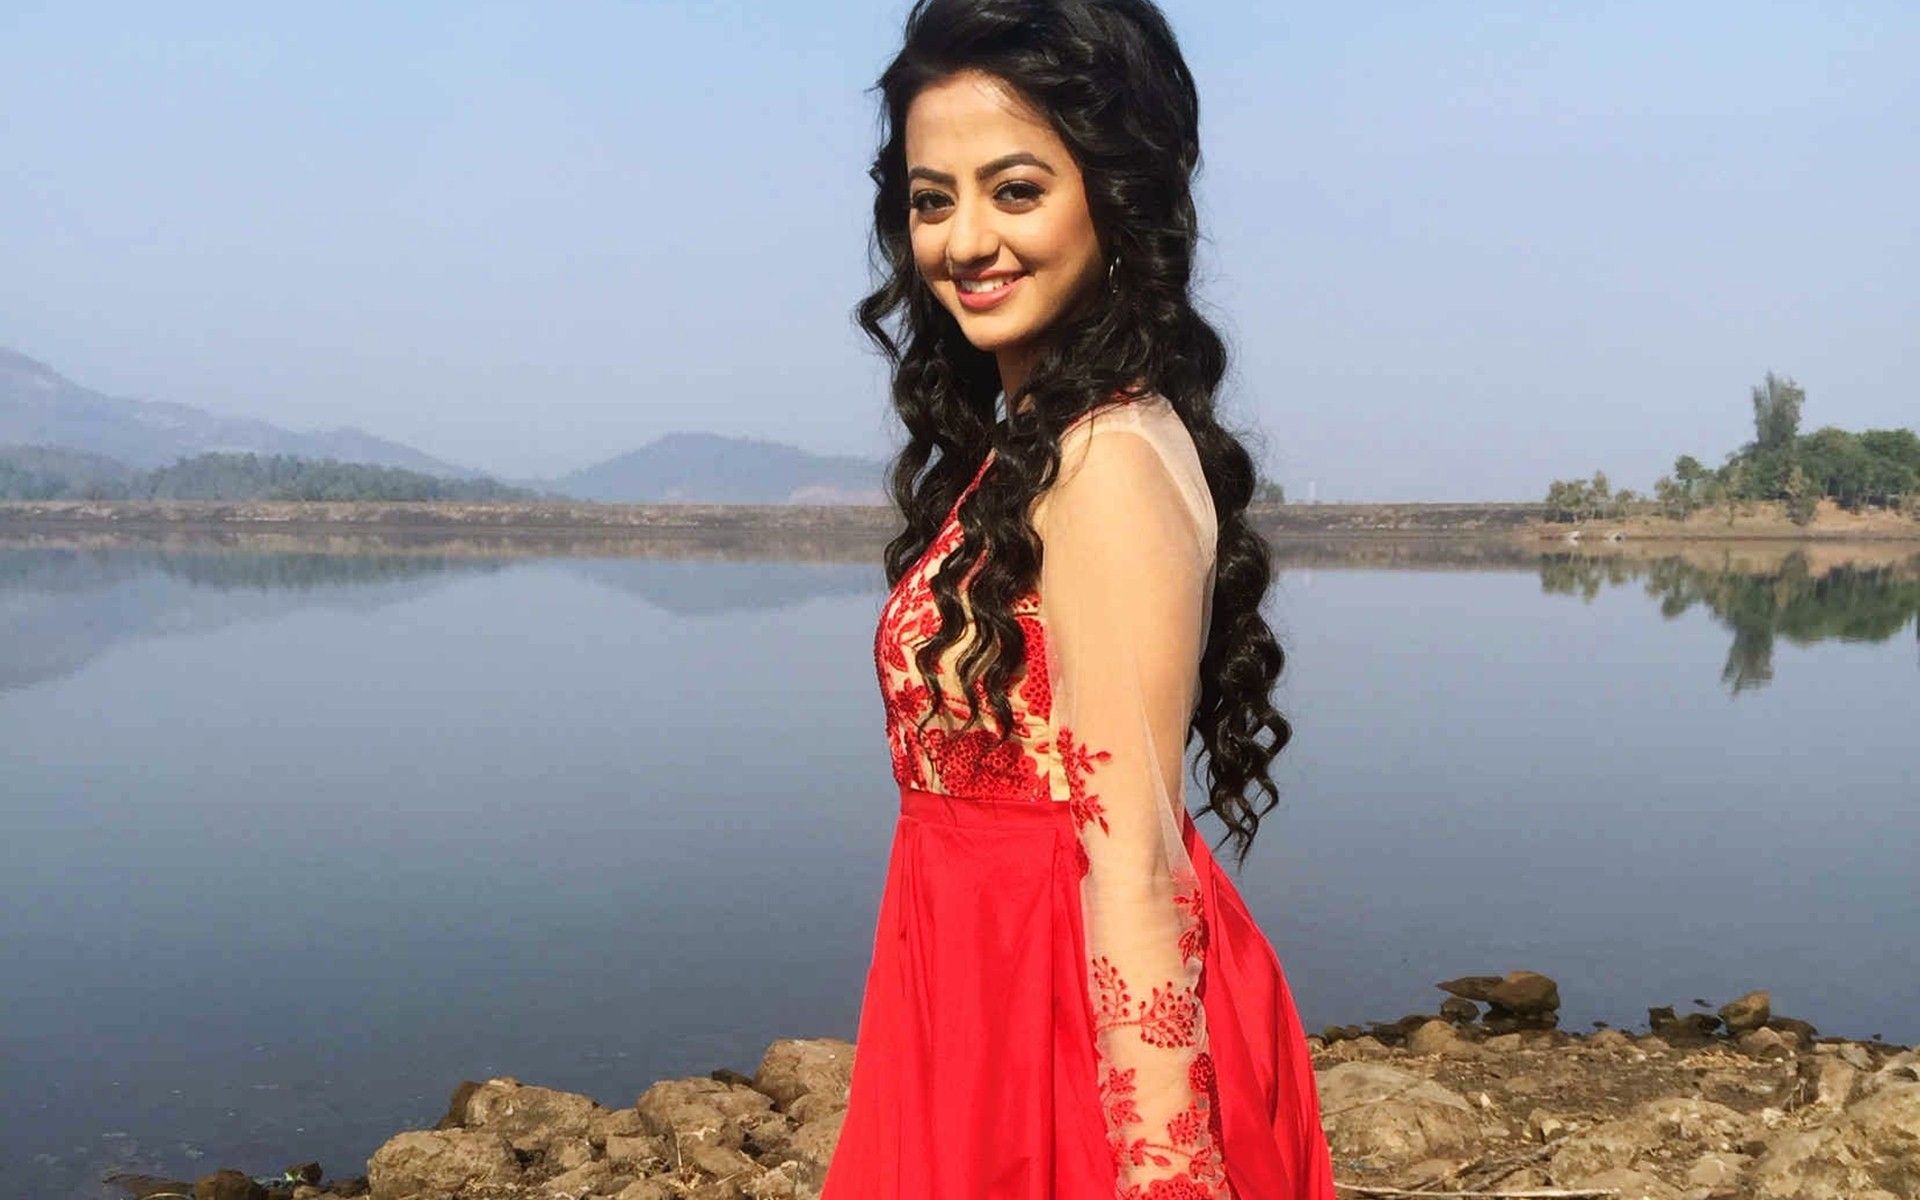 Helly Shah Hairstyle Wallpaper 02251